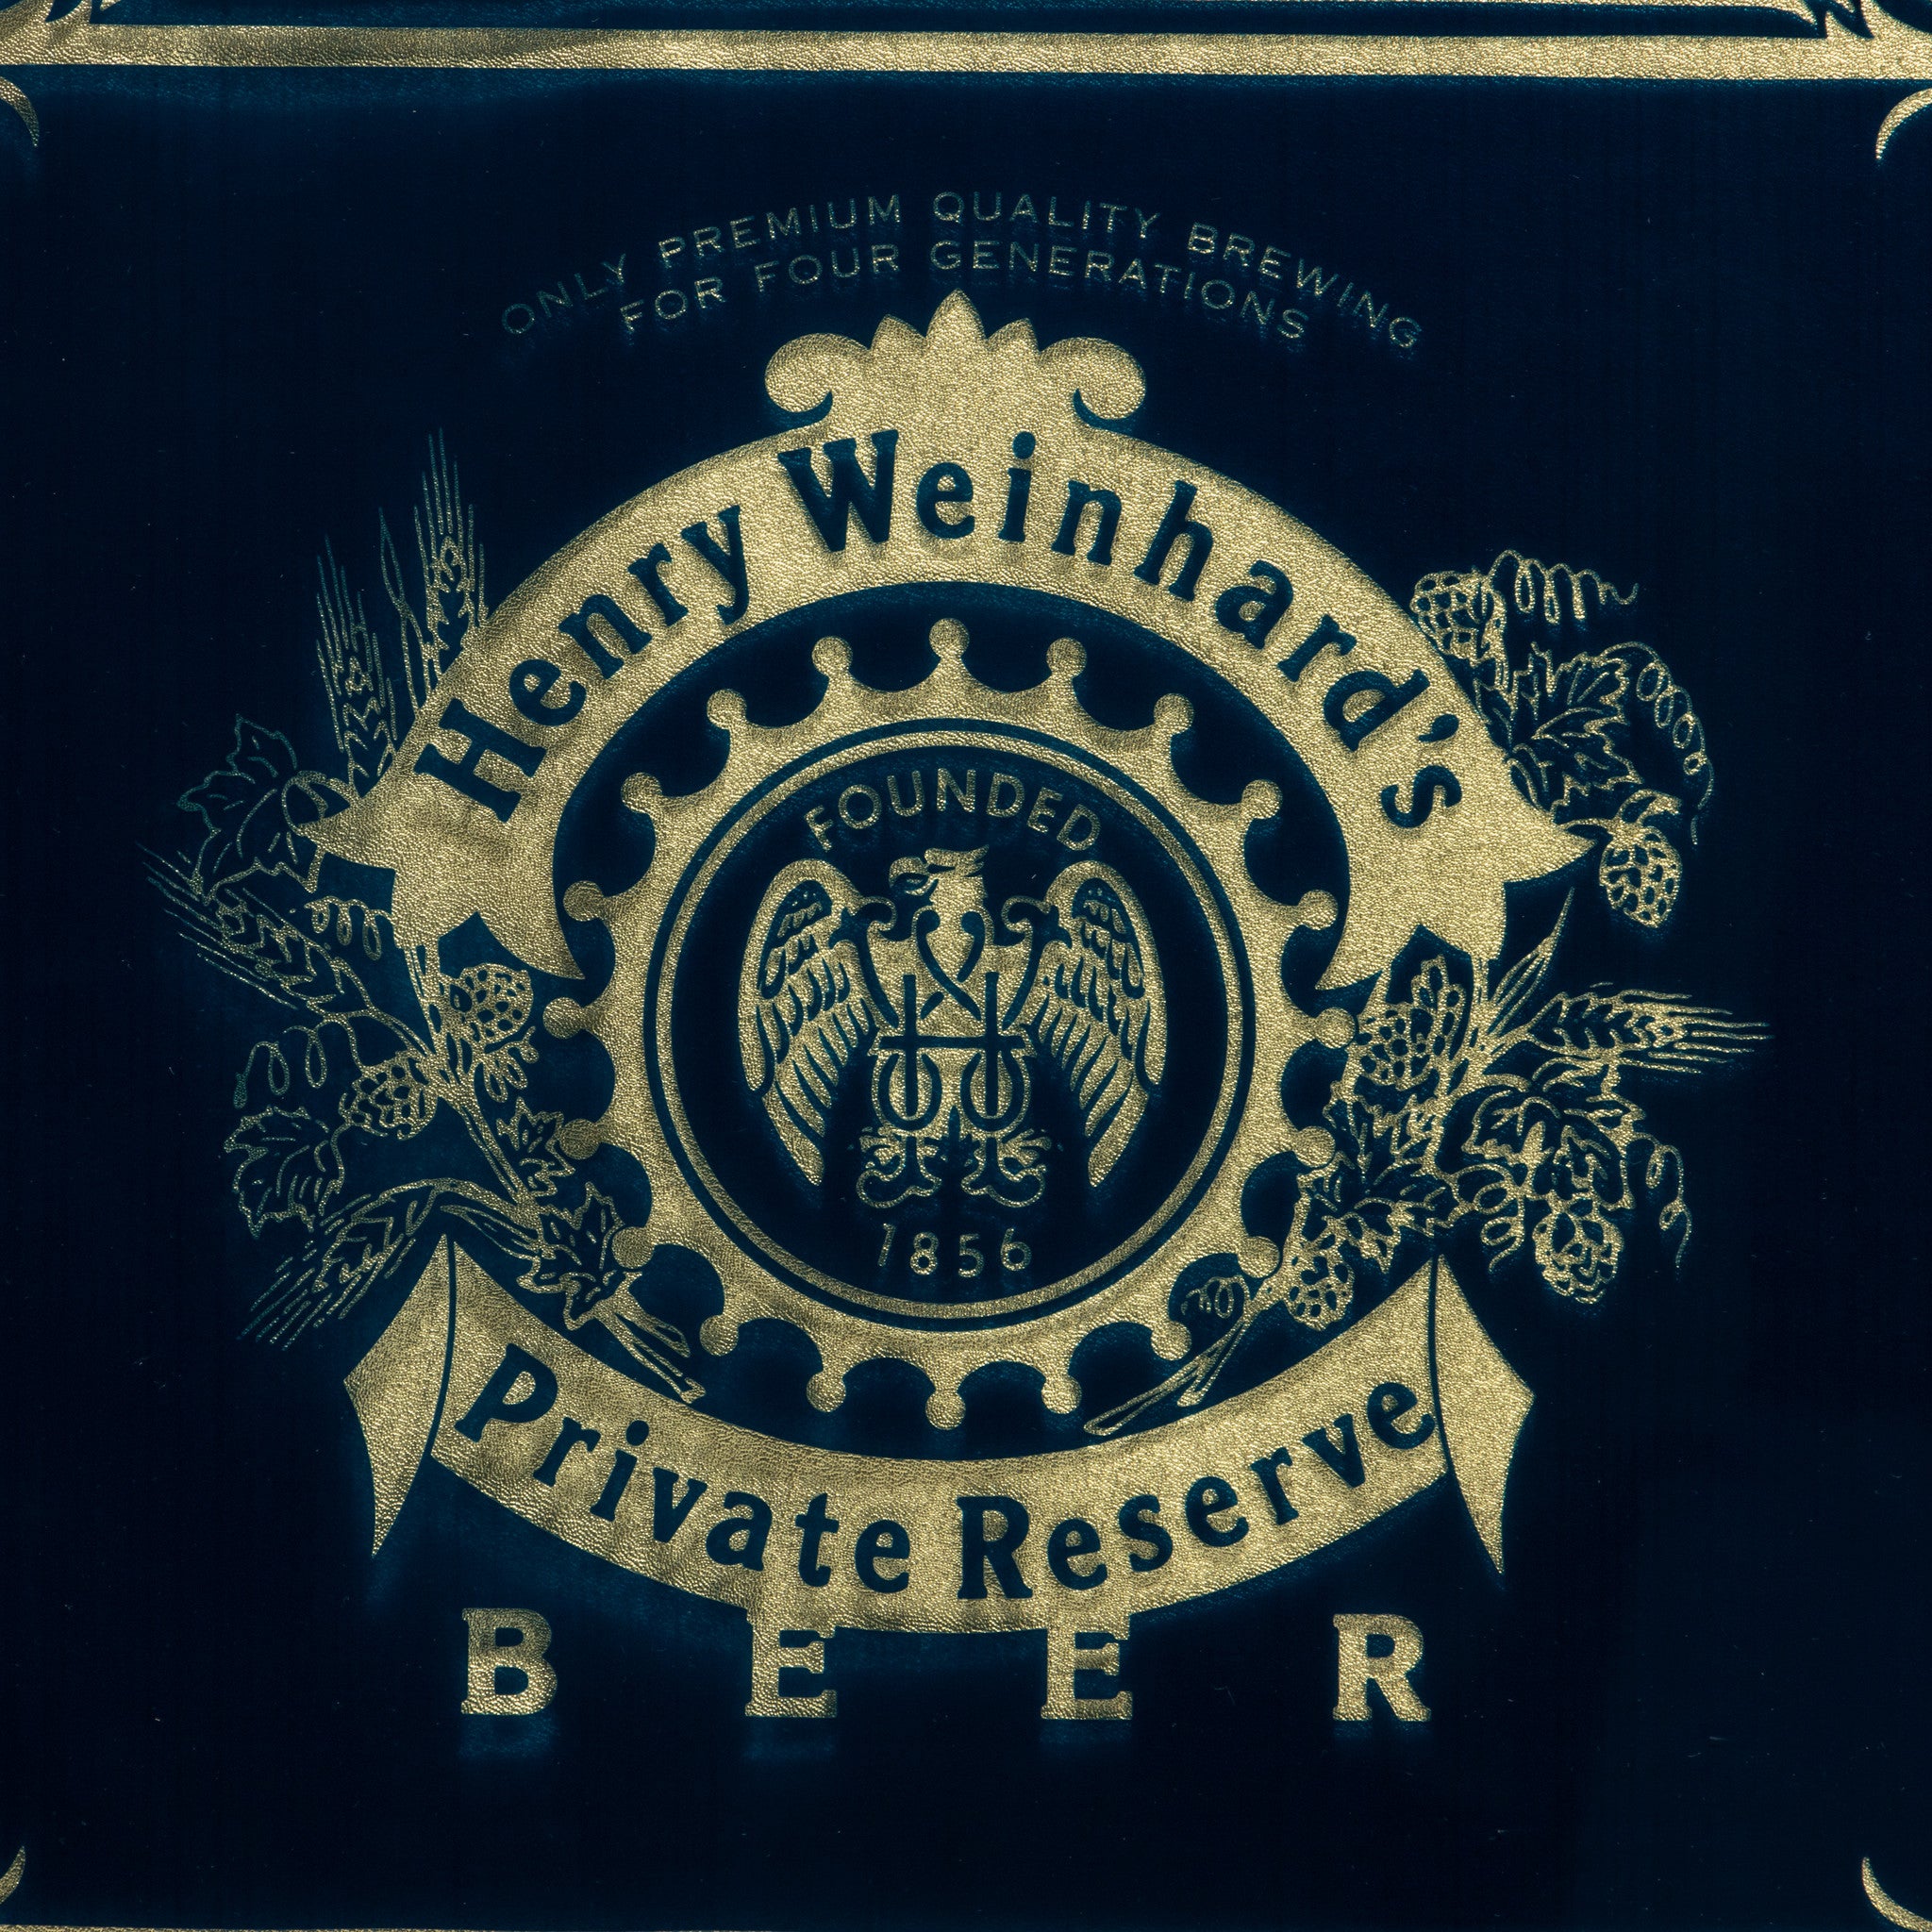 Henry Weinhard's Private Reserve Beer Mirror